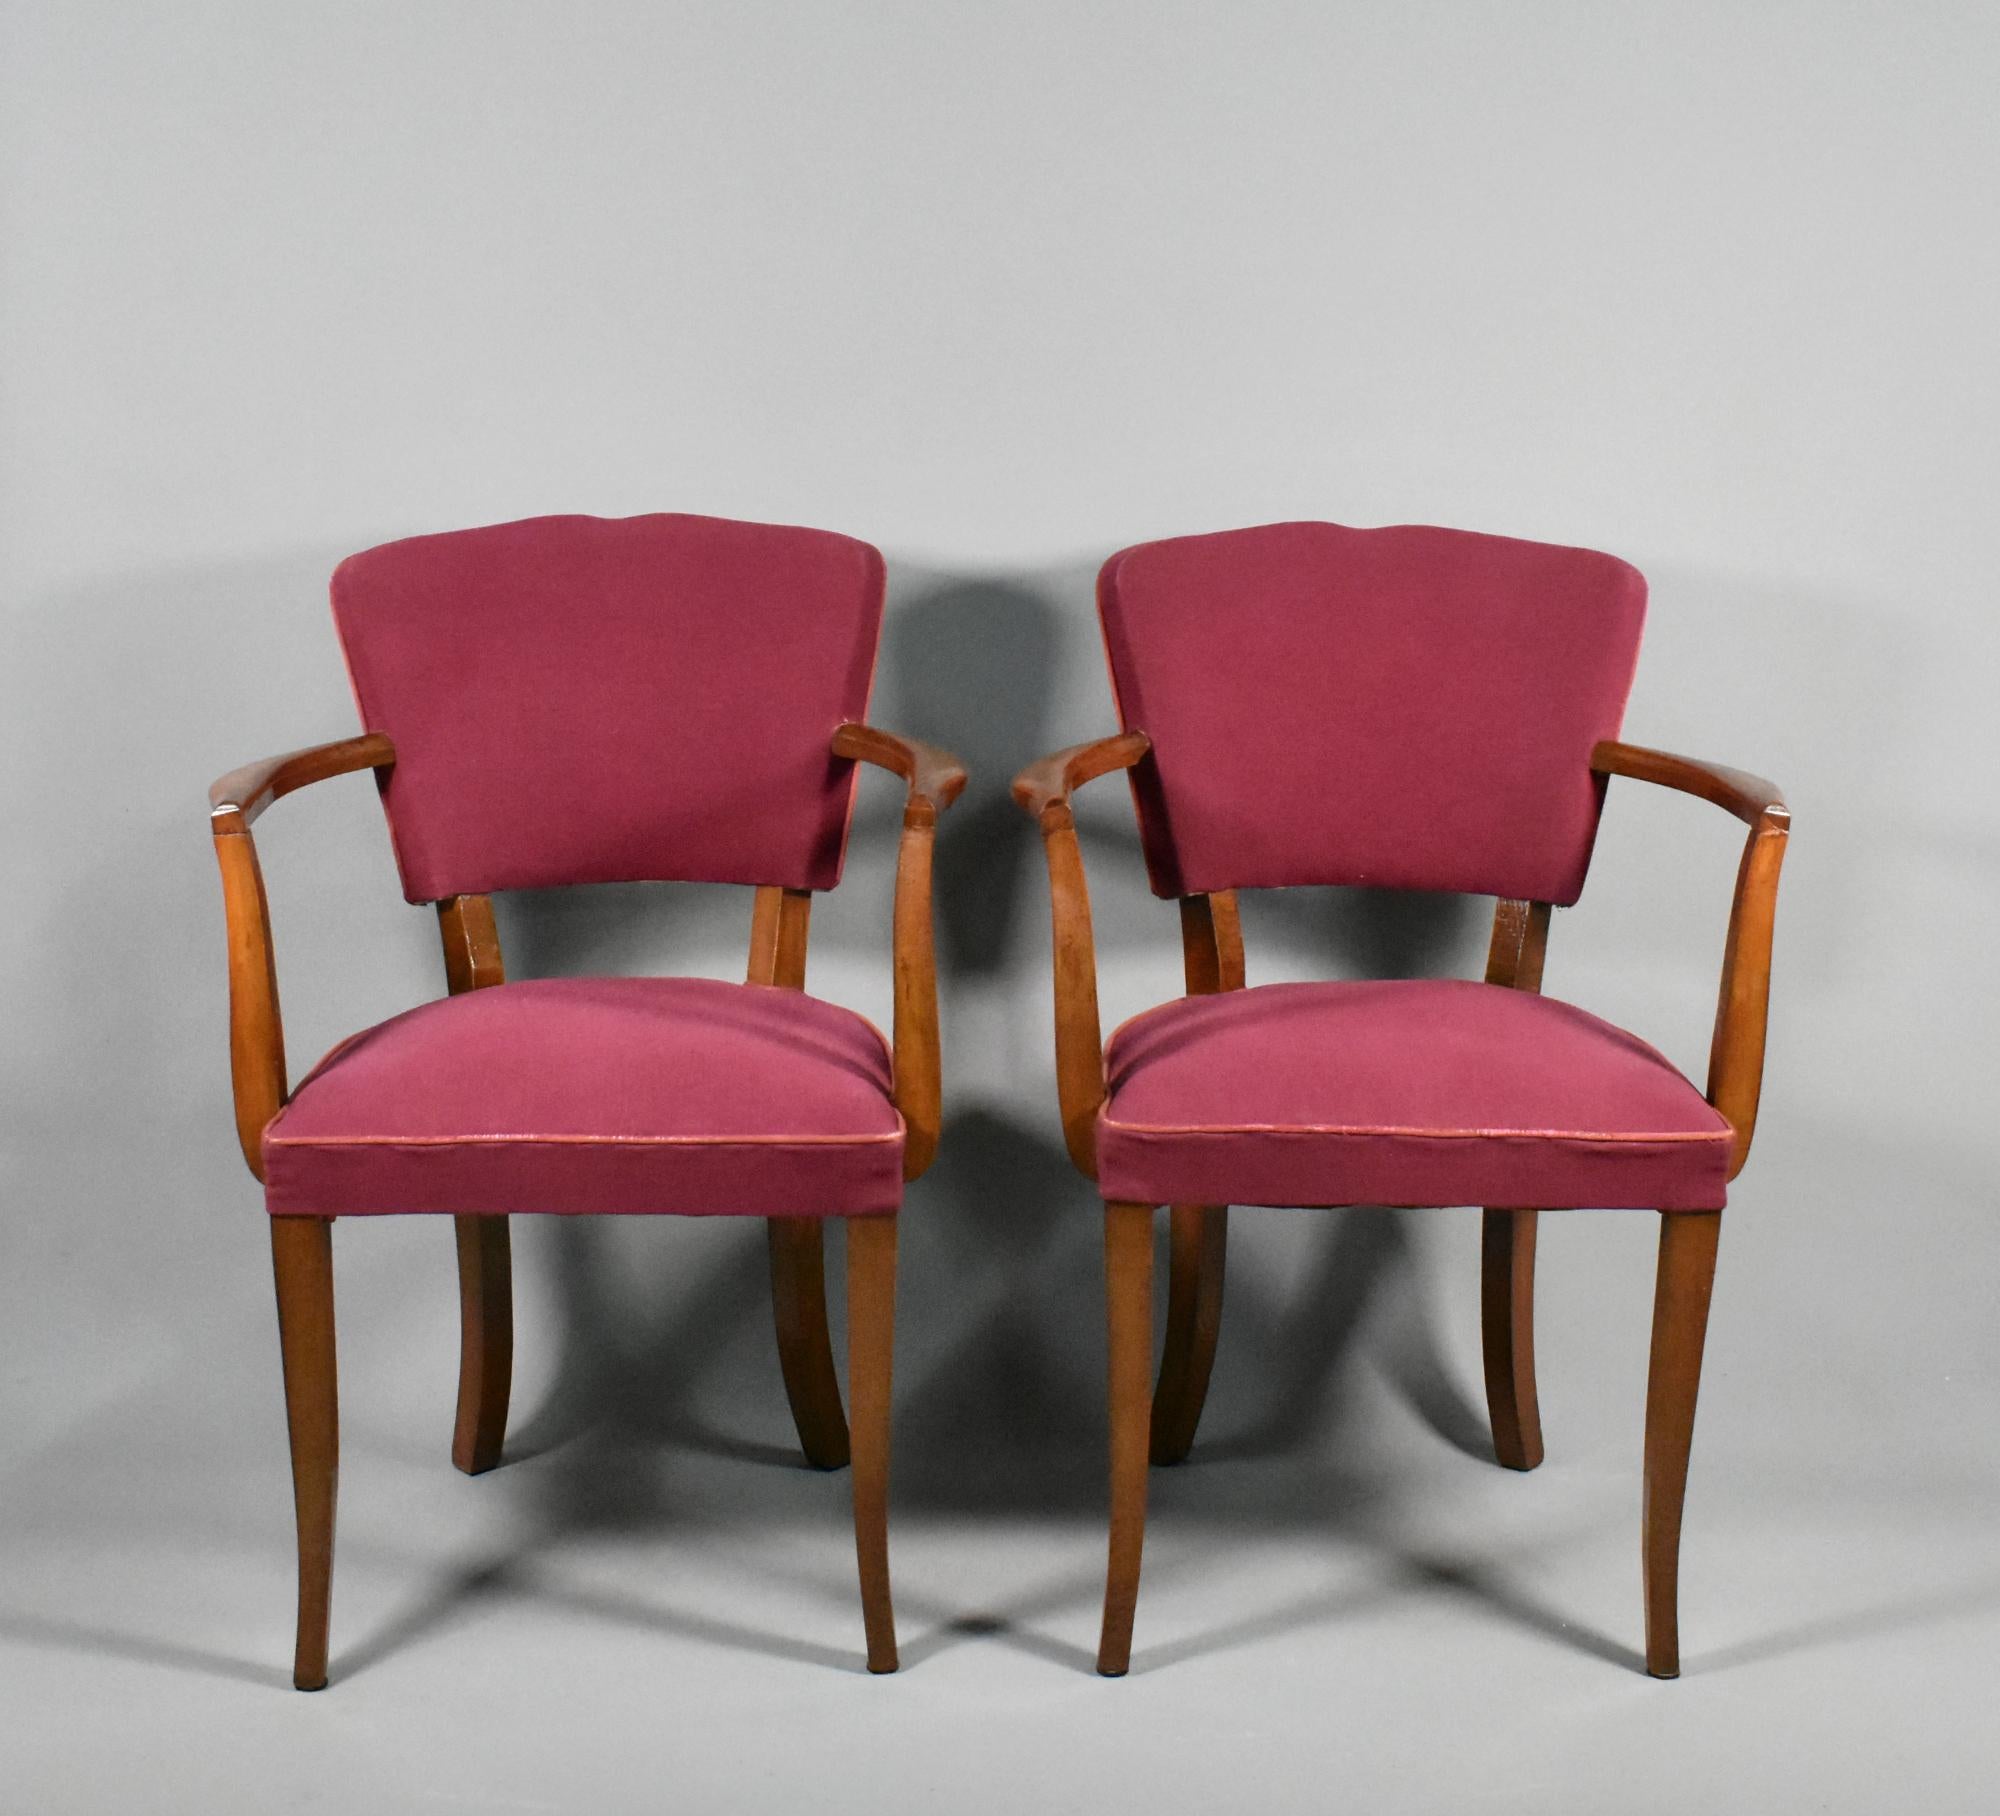 Pair French Art Deco Moustache Bridge Chairs 

An elegant matching pair of Pair French Art Deco Moustache Bridge Chairs, presented in their original burgundy upholstery with piped edging. 

The chairs feature gently out-swept legs and elegant, bowed